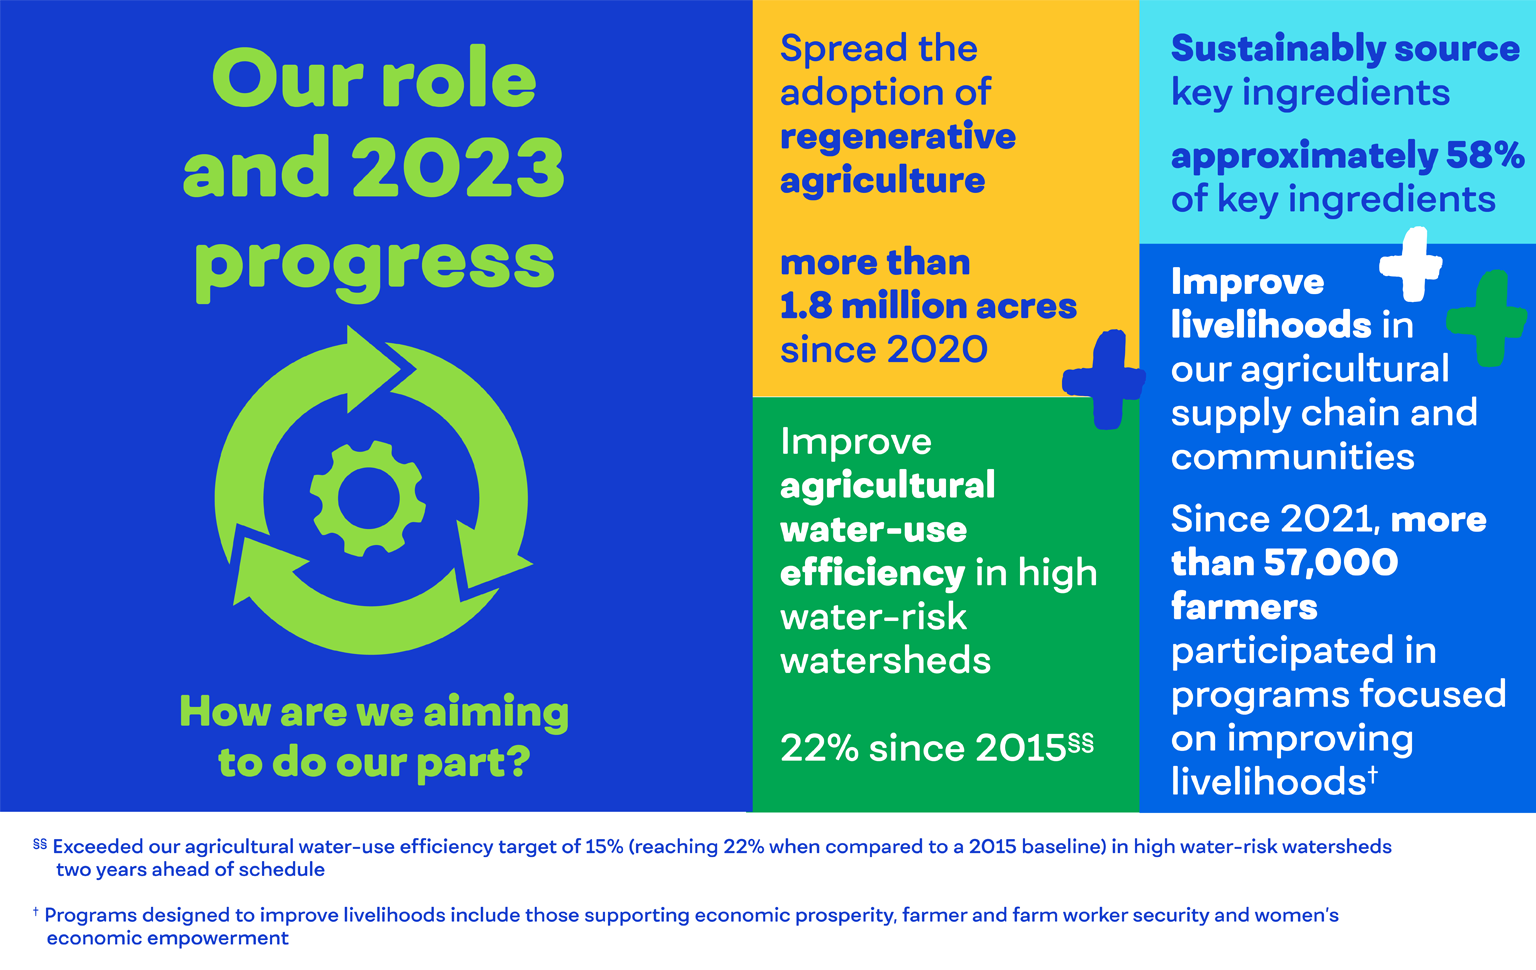 Our role and 2023 progress: How are we aiming to do our part?